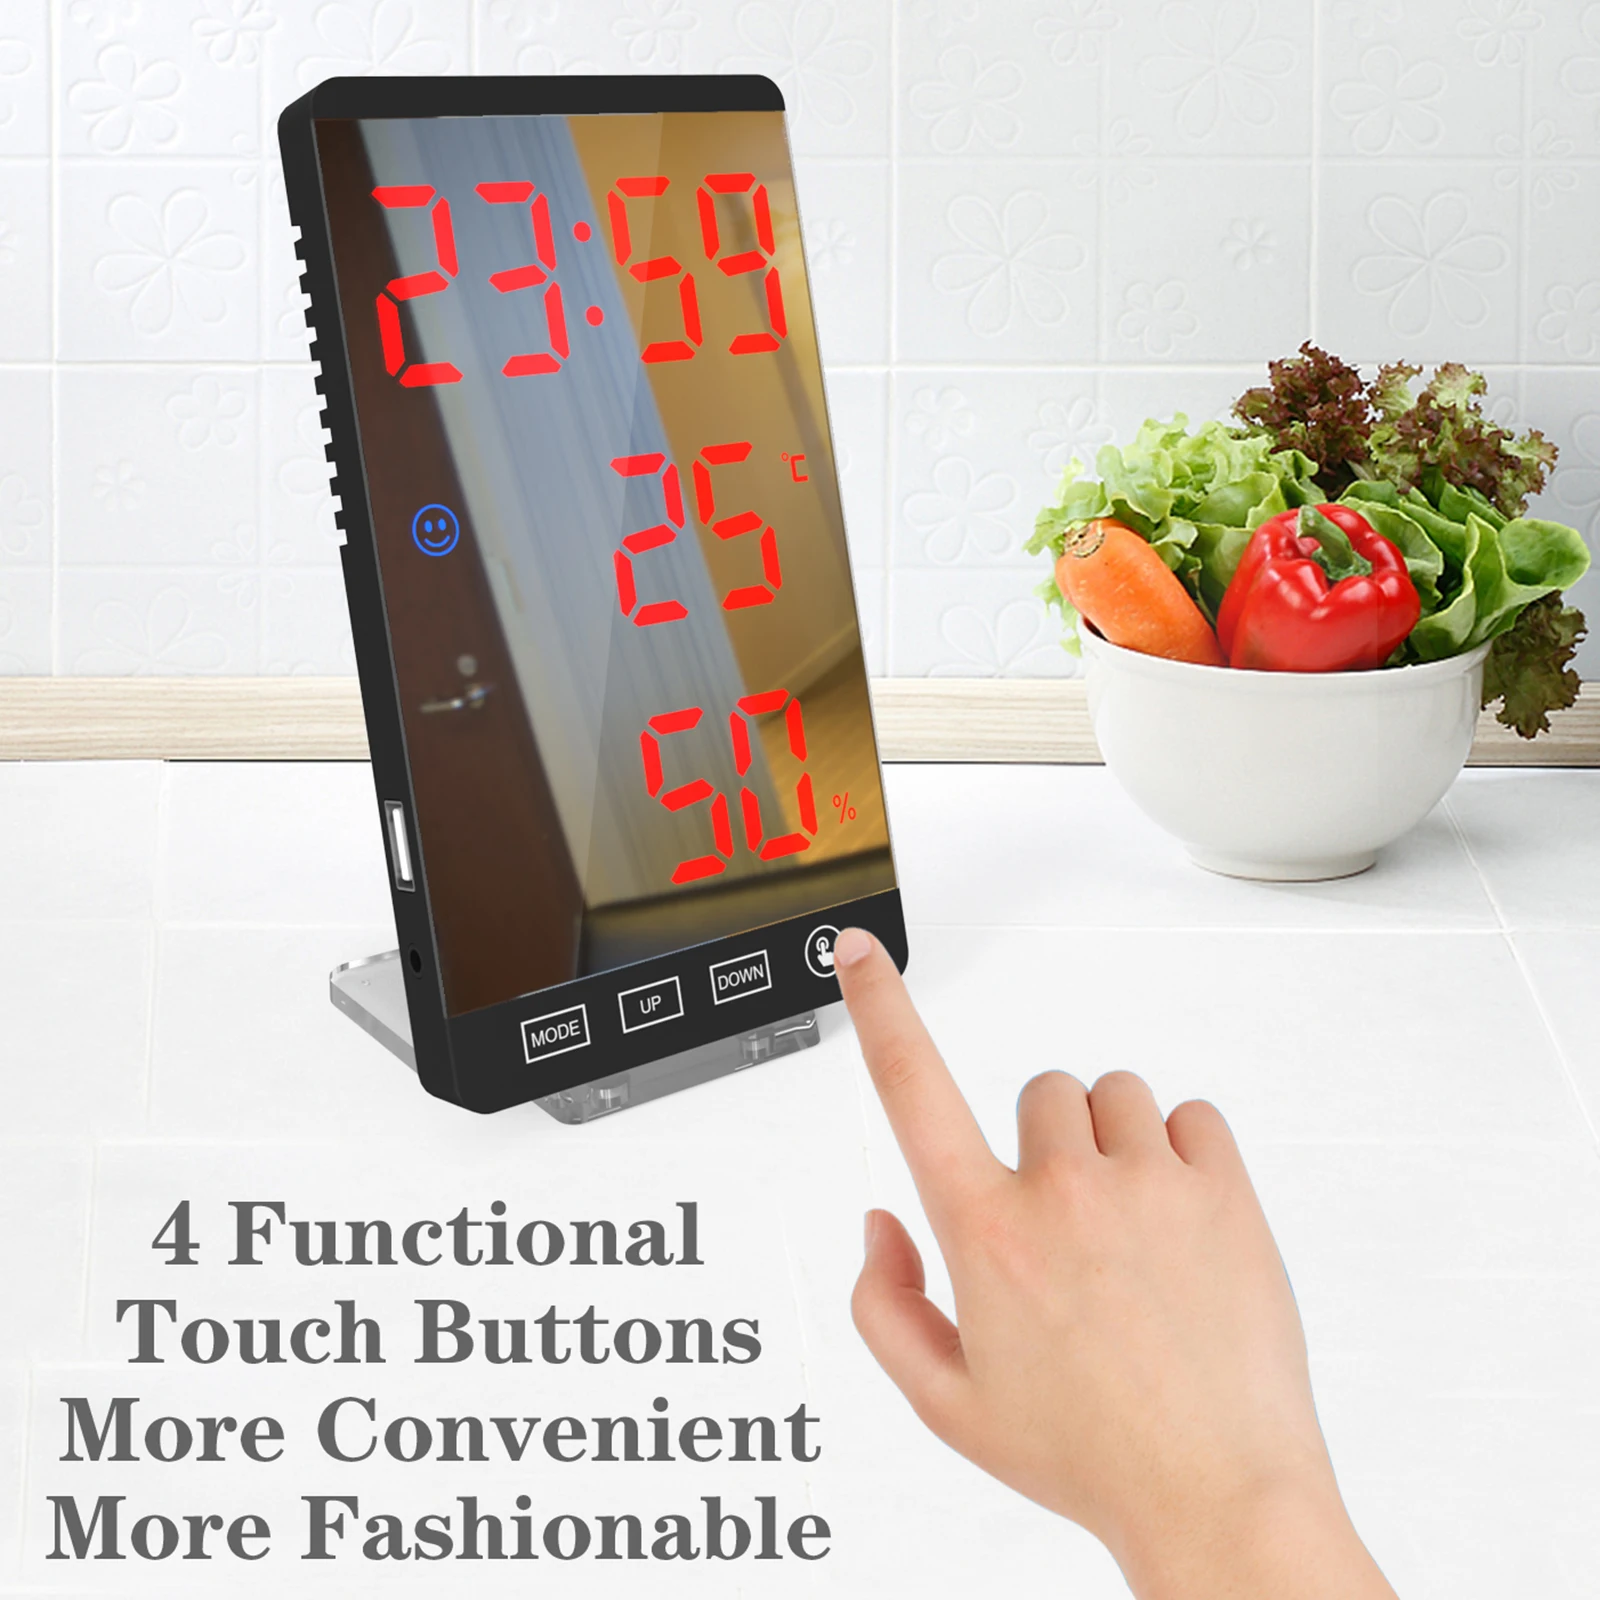 NEW 6 Inch LED Alarm Clock Snooze Calendar Thermometer Display Home Clock